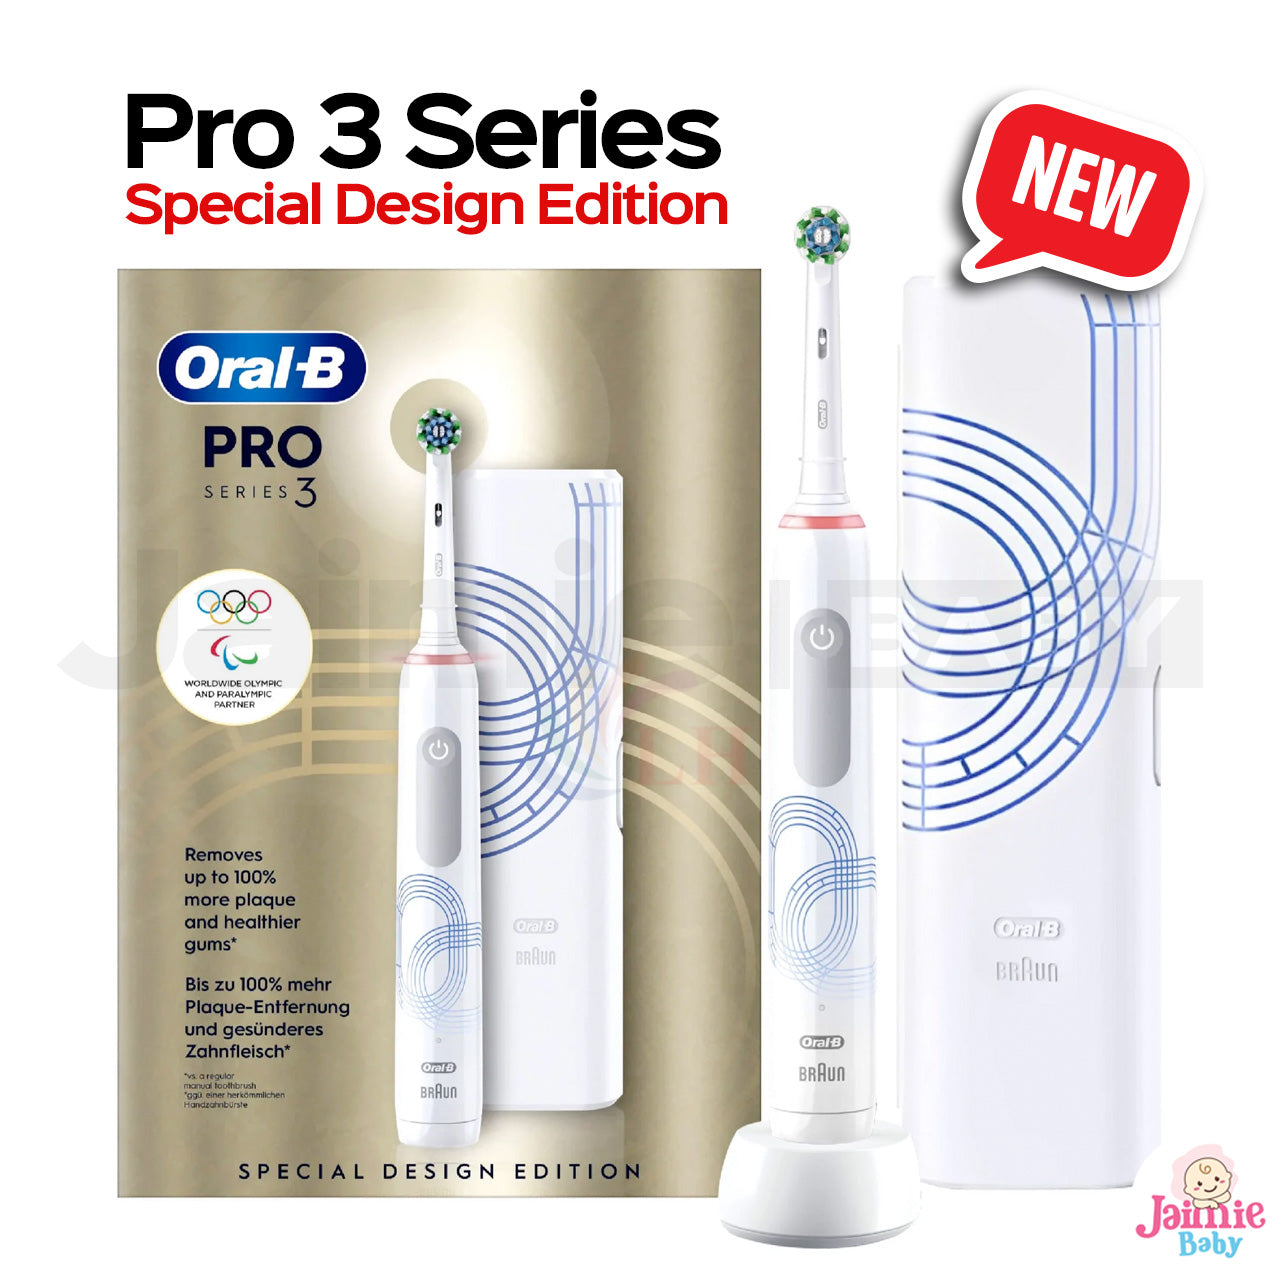 Oral-B Pro 3000 rechargeable electric toothbrush Olympic Limited Edition with travel case